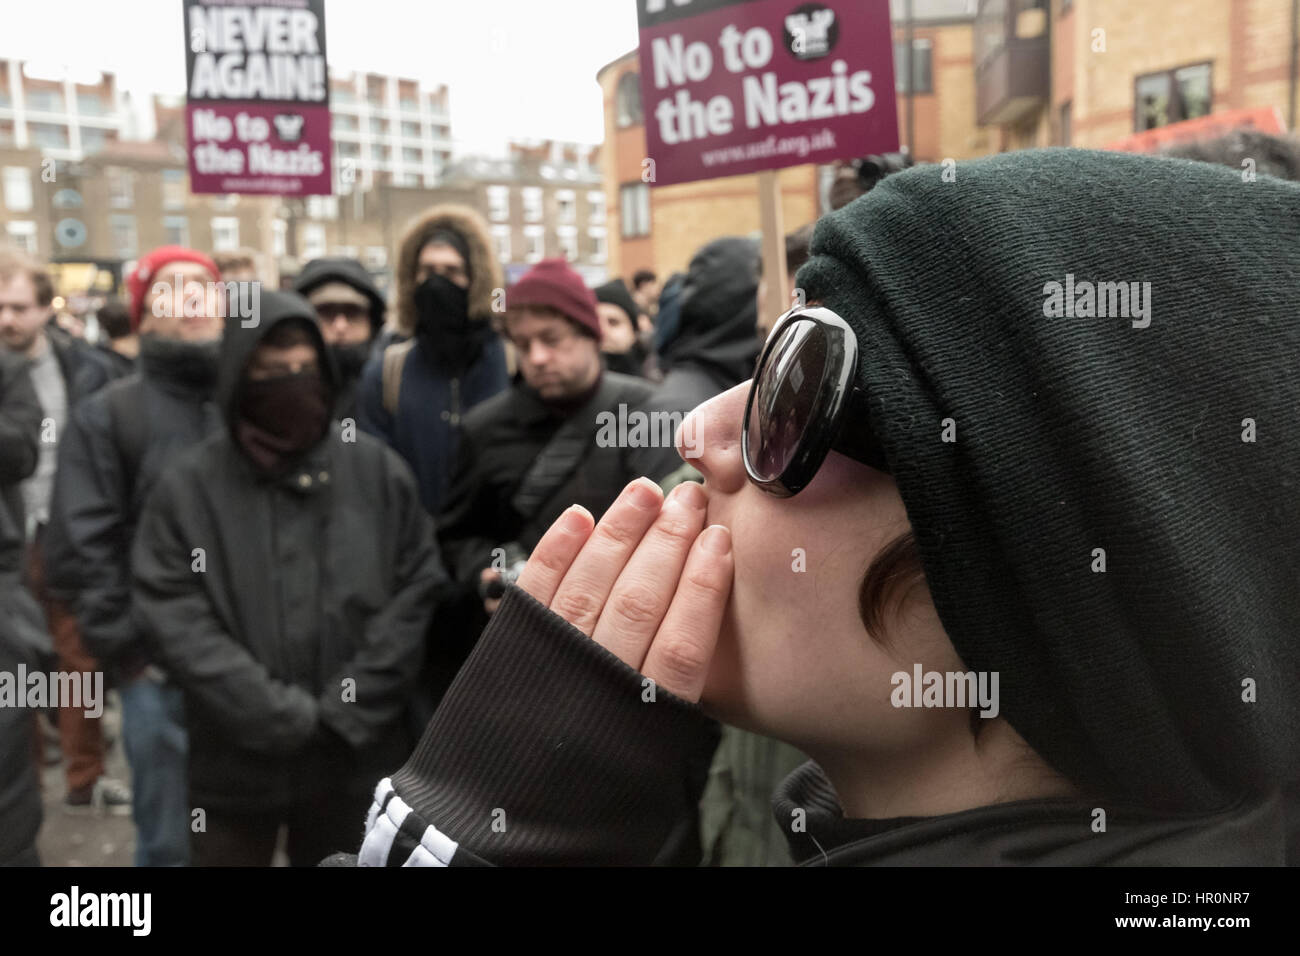 London, UK. 25th February 2017.  Protesters argue with a man outside the LD50  gallery in Dalston who says he has come to defend that the right to freely discuss ideas, even repulsive ones. He was shouted at by protesters and eventually police took him aside and advised him to leave. Several hundred people from East London had gathered outside the  gallery which they say has promoted fascists, neo-Nazis, misogynists, racists and Islamophobes in one of London's more diverse areas. Credit: Peter Marshall/Alamy Live News Stock Photo